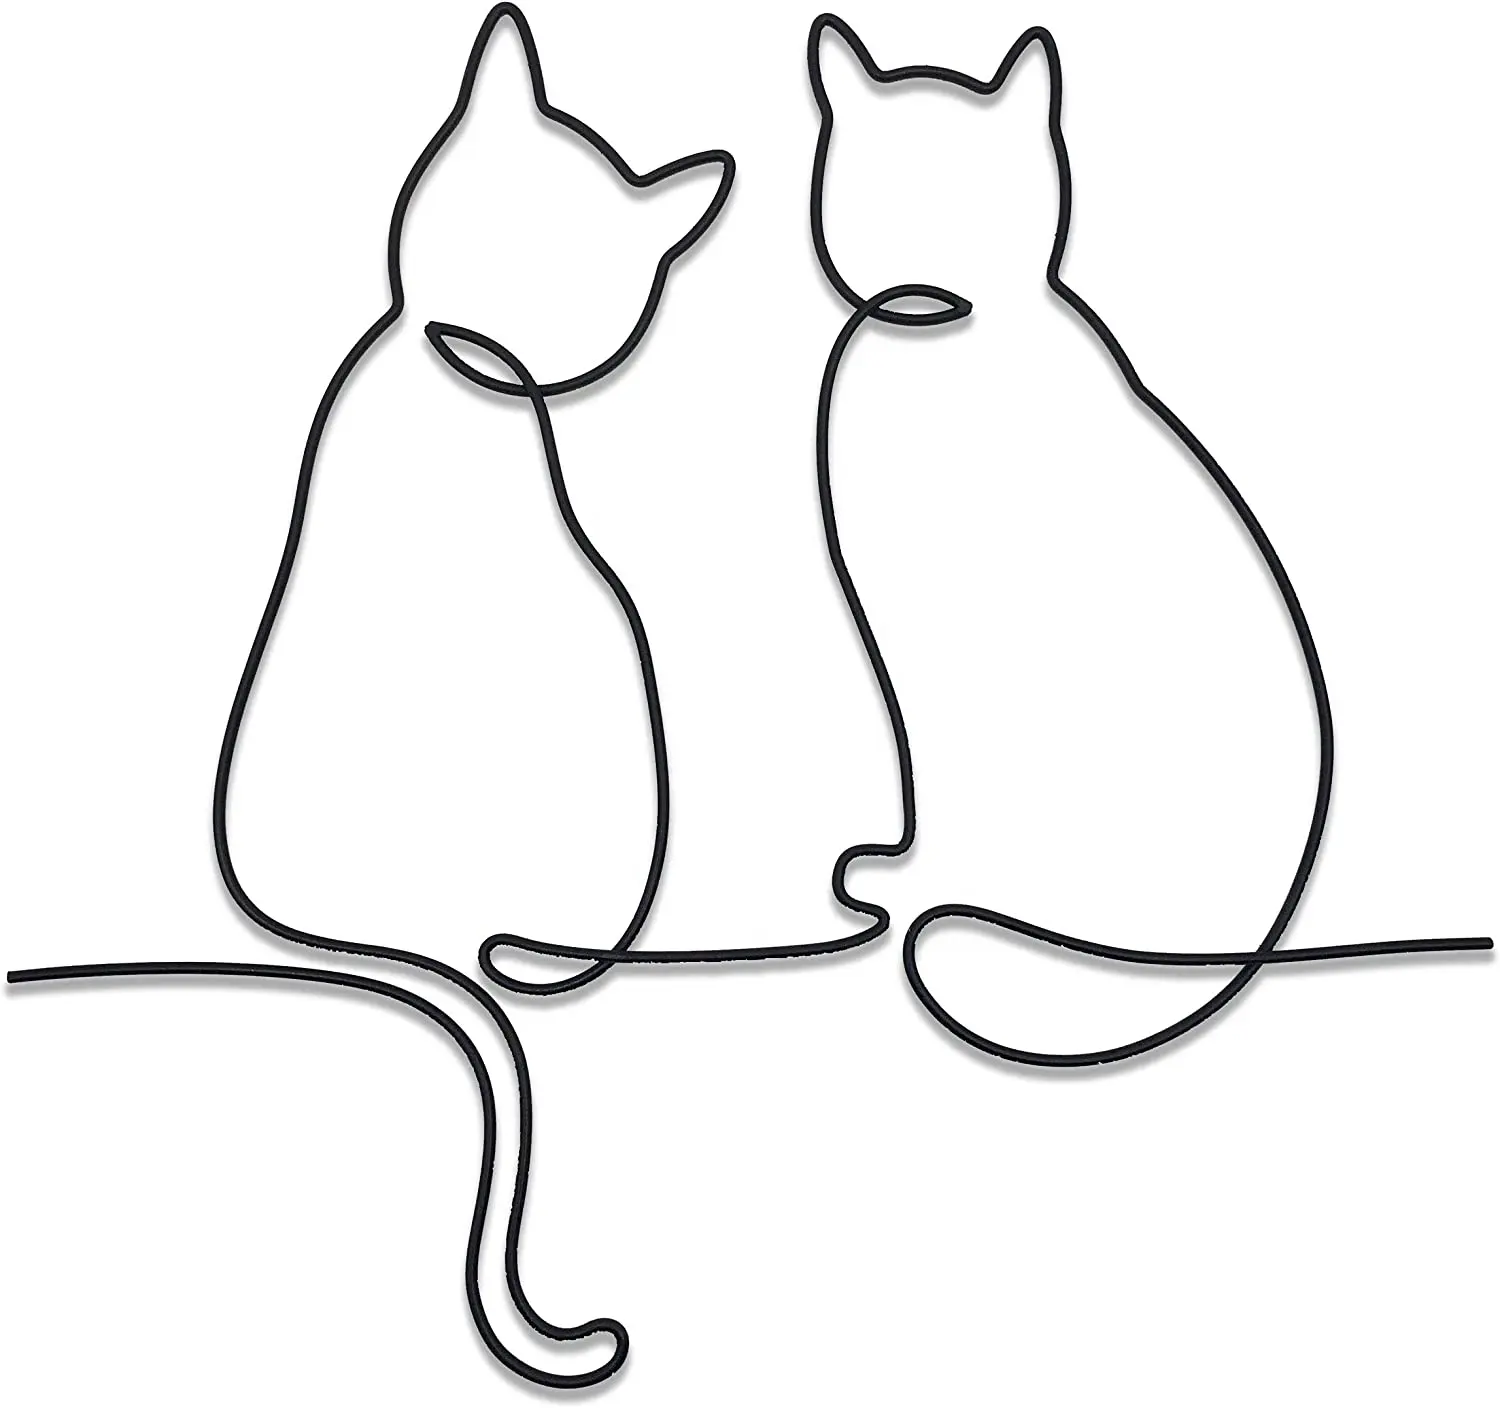 Wholesale New Design Minimalist Room Metal Wire Cat Shape Wall Decor Wall Art for Living Room Wall Decor